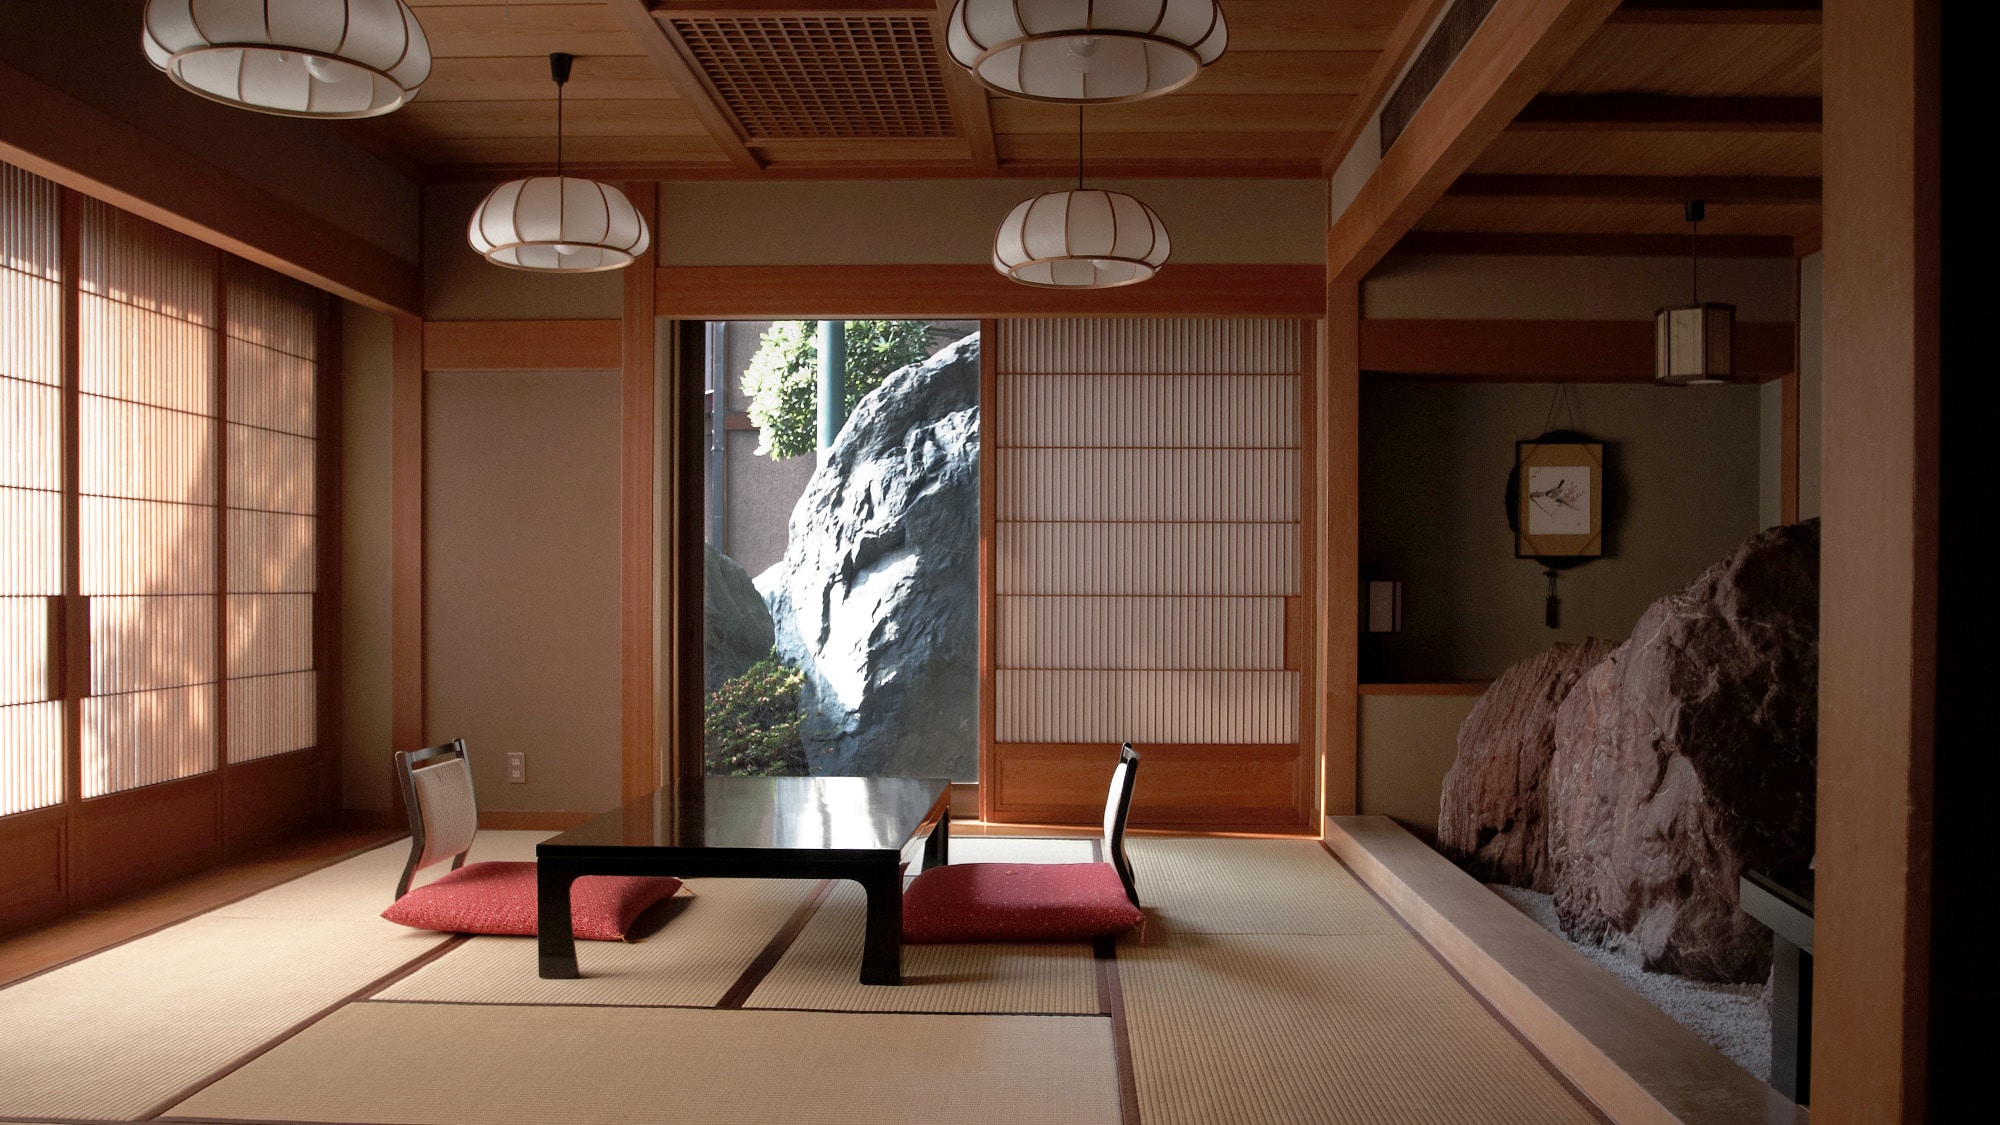 Example of a guest room where you can relax in a Japanese atmosphere (with the following room / example)